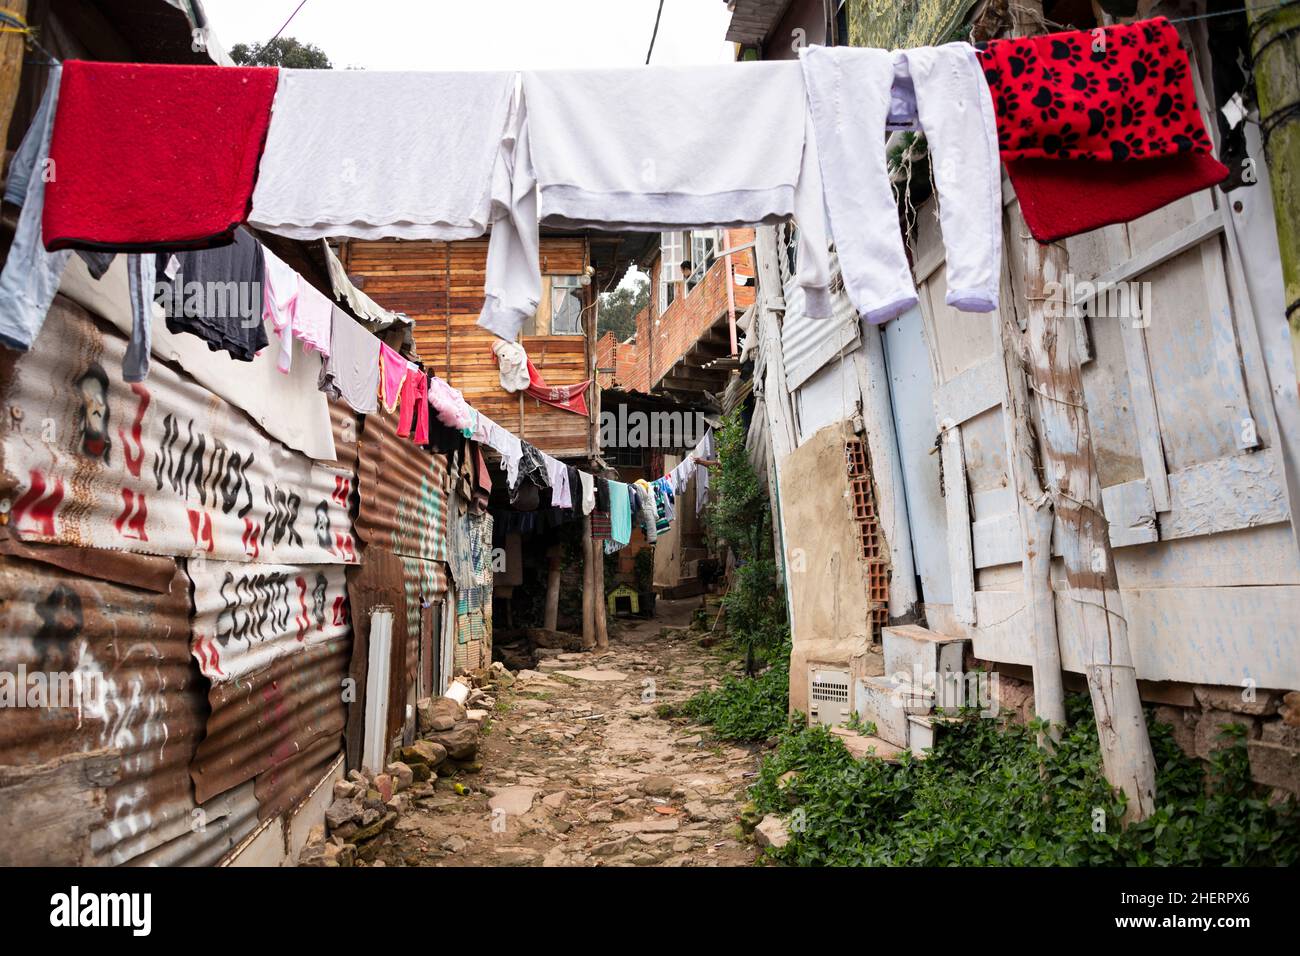 Washing drying in an alleyway amongst deprived shanty town shacks, in notorious gang Barrio Egipto neighborhood, Bogota, Colombia, South America. Stock Photo